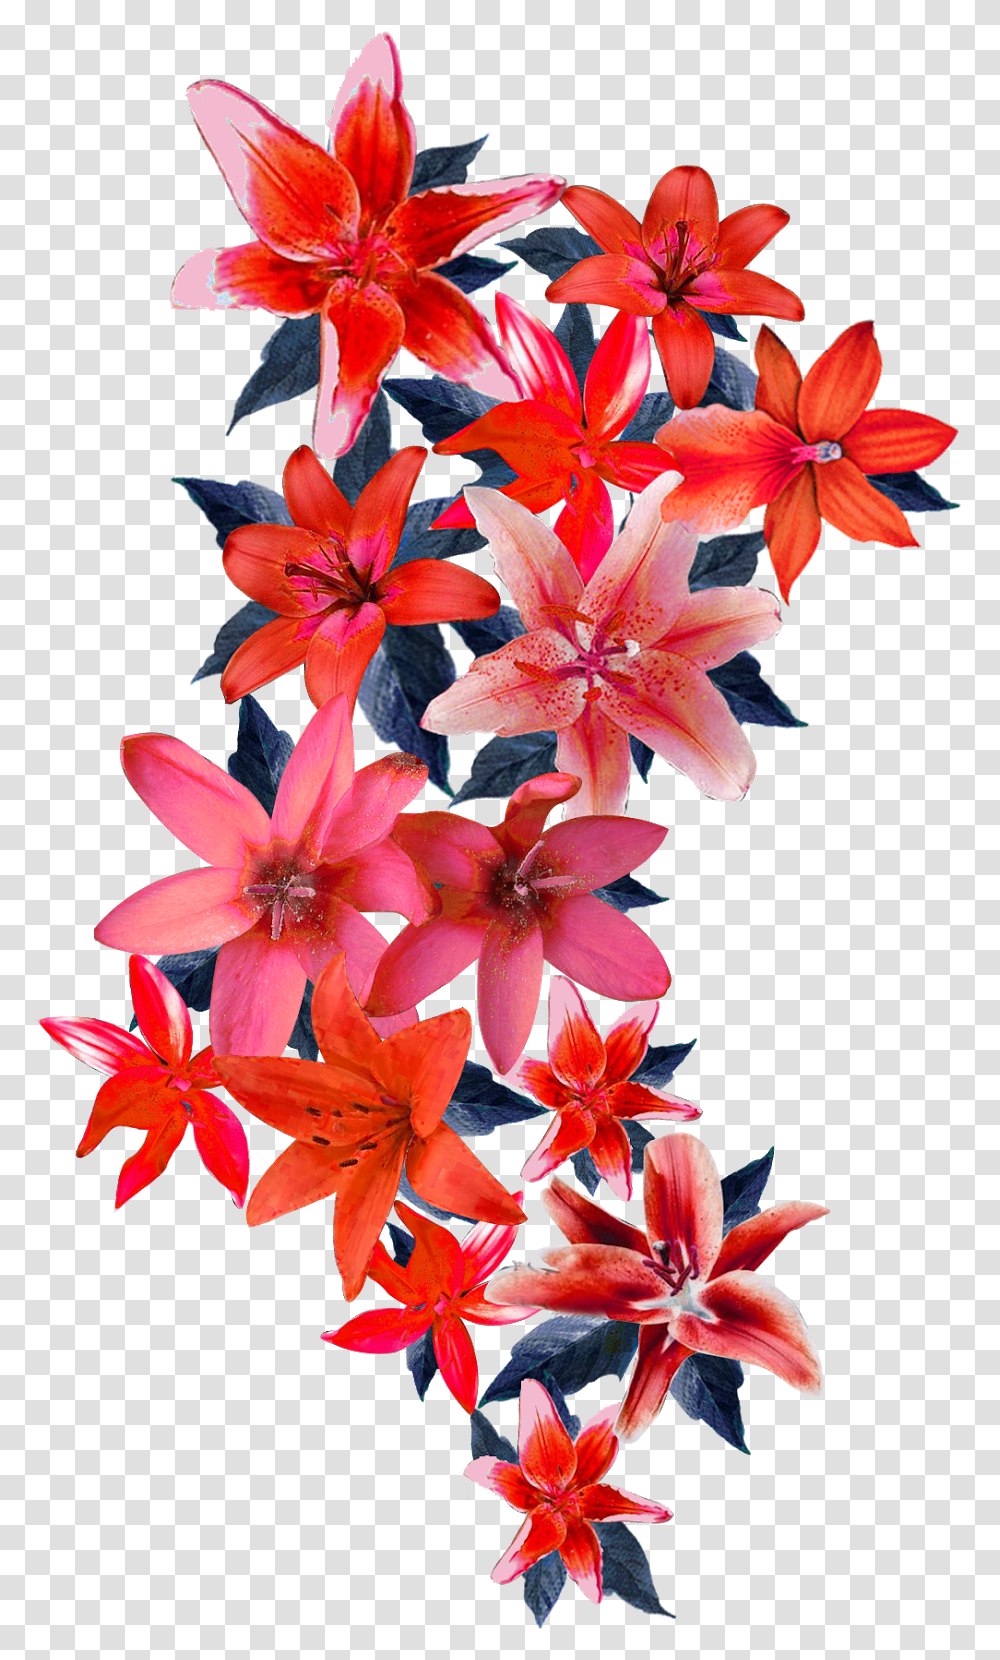 Flowers Designs In, Plant, Blossom, Lily, Amaryllis Transparent Png